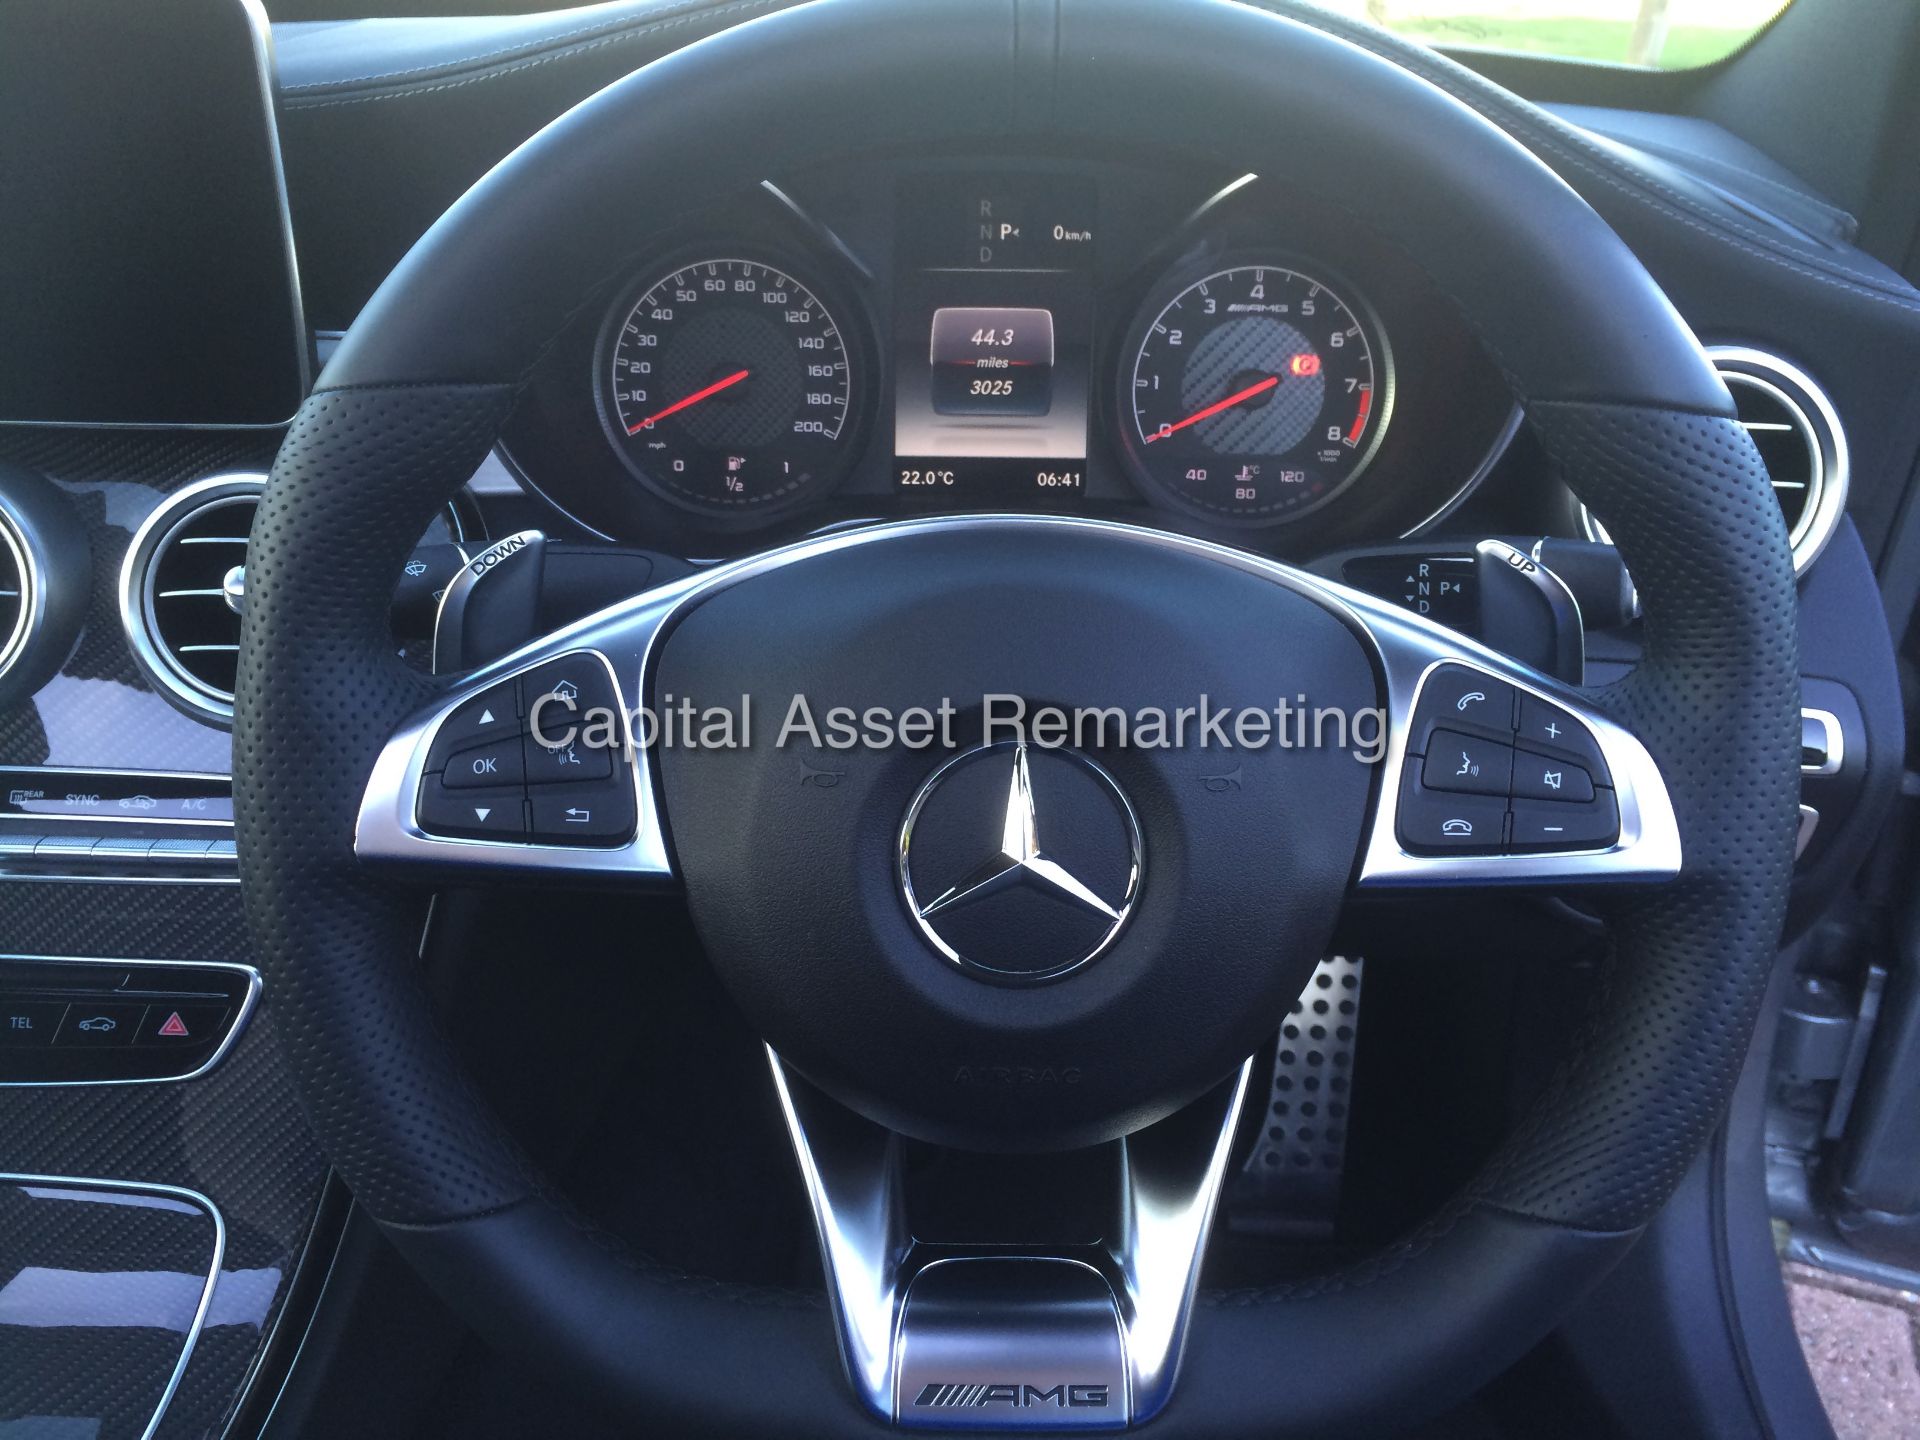 (On Sale) MERCEDES C63 "AMG PREMIUM" V8 BI-TURBO (2016) - 1 OWNER-COMMAND-LEATHER - PAN ROOF *LOOK* - Image 11 of 28